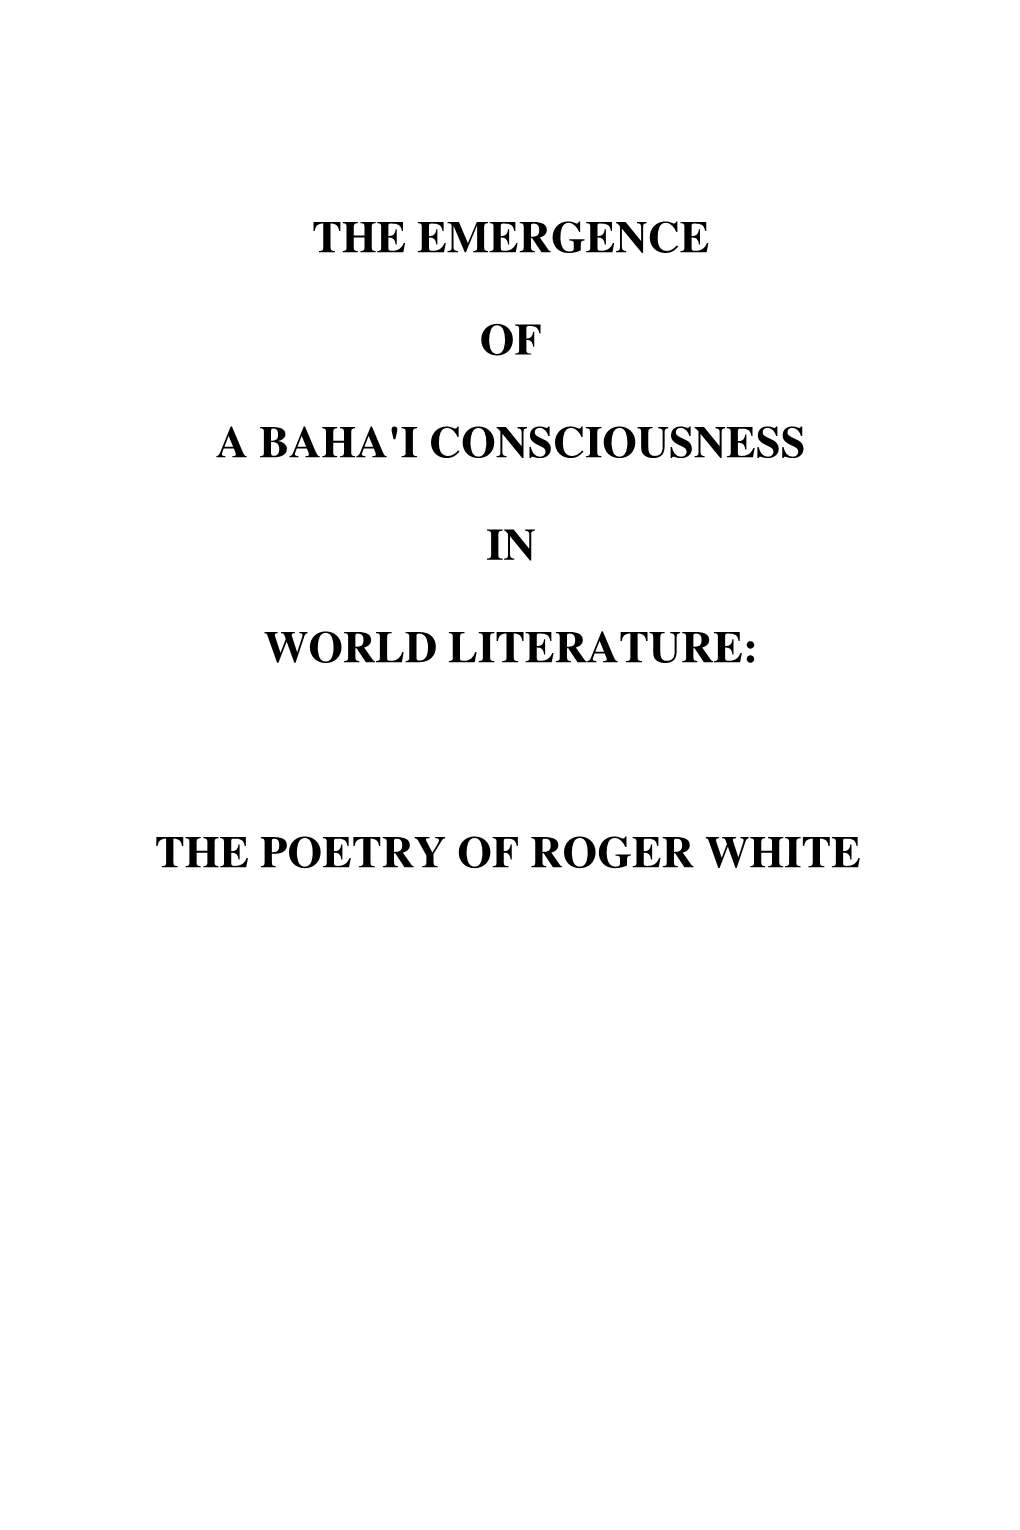 The Emergence of a Baha'i Consciousness in World Literature